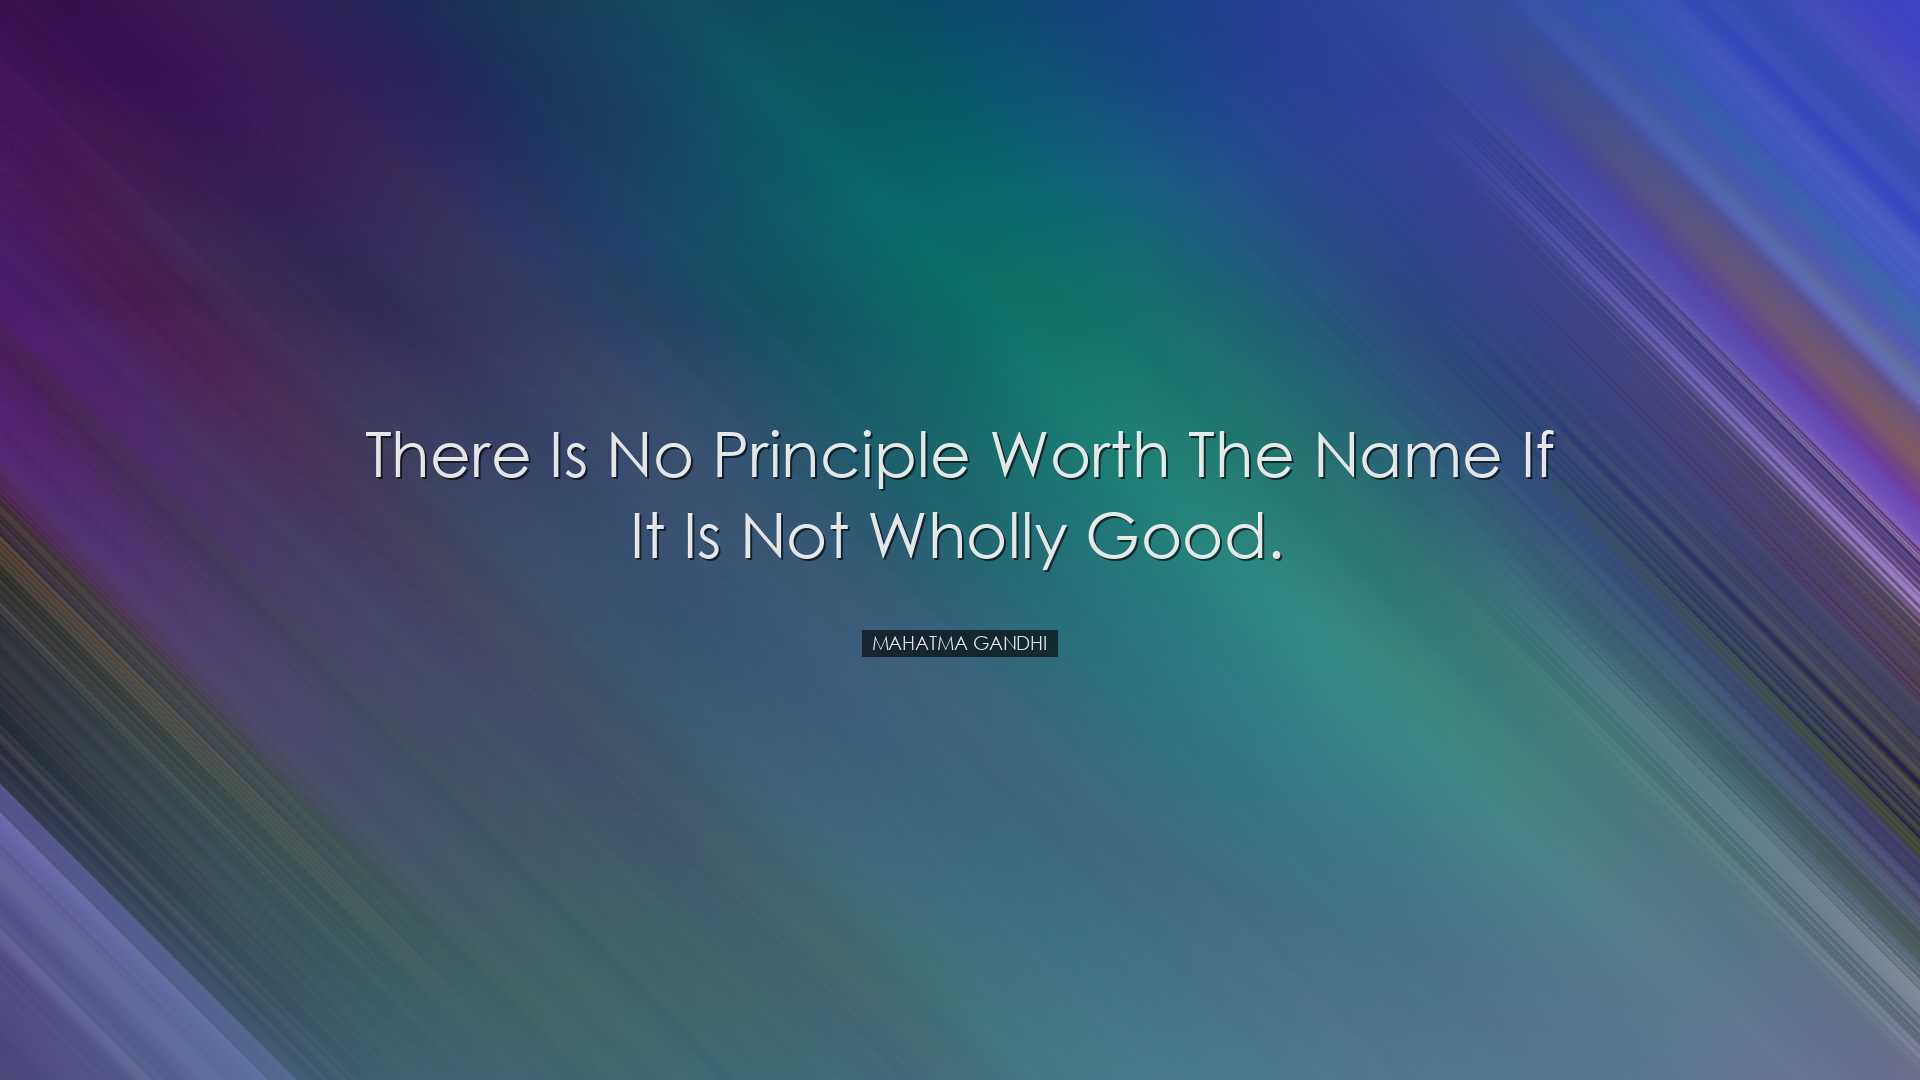 There is no principle worth the name if it is not wholly good. - M